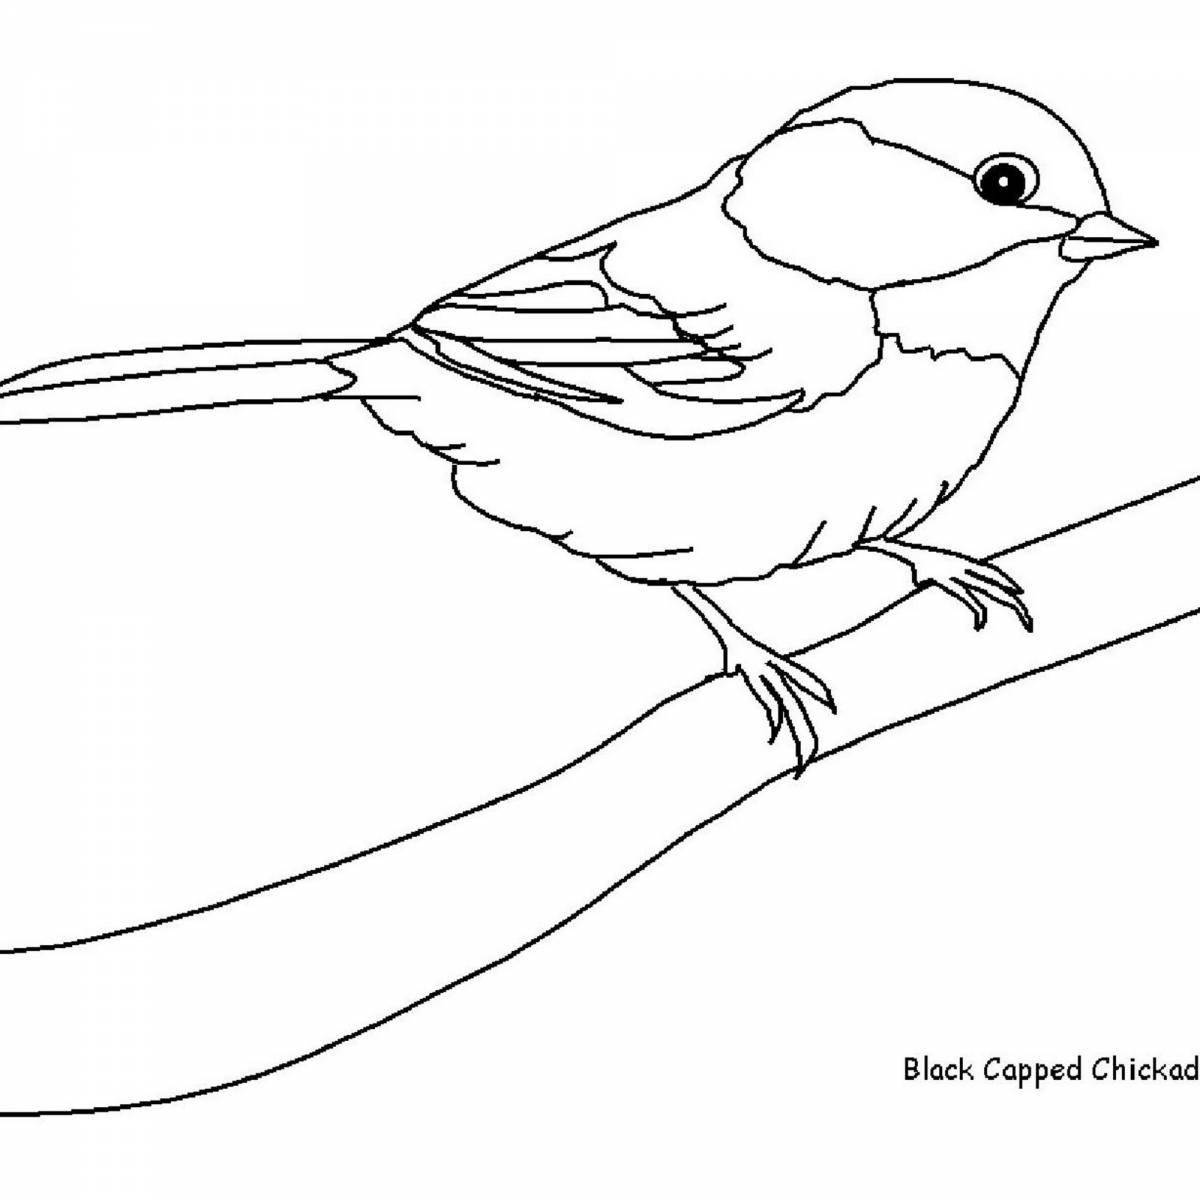 Colouring bright sparrow for children 2-3 years old